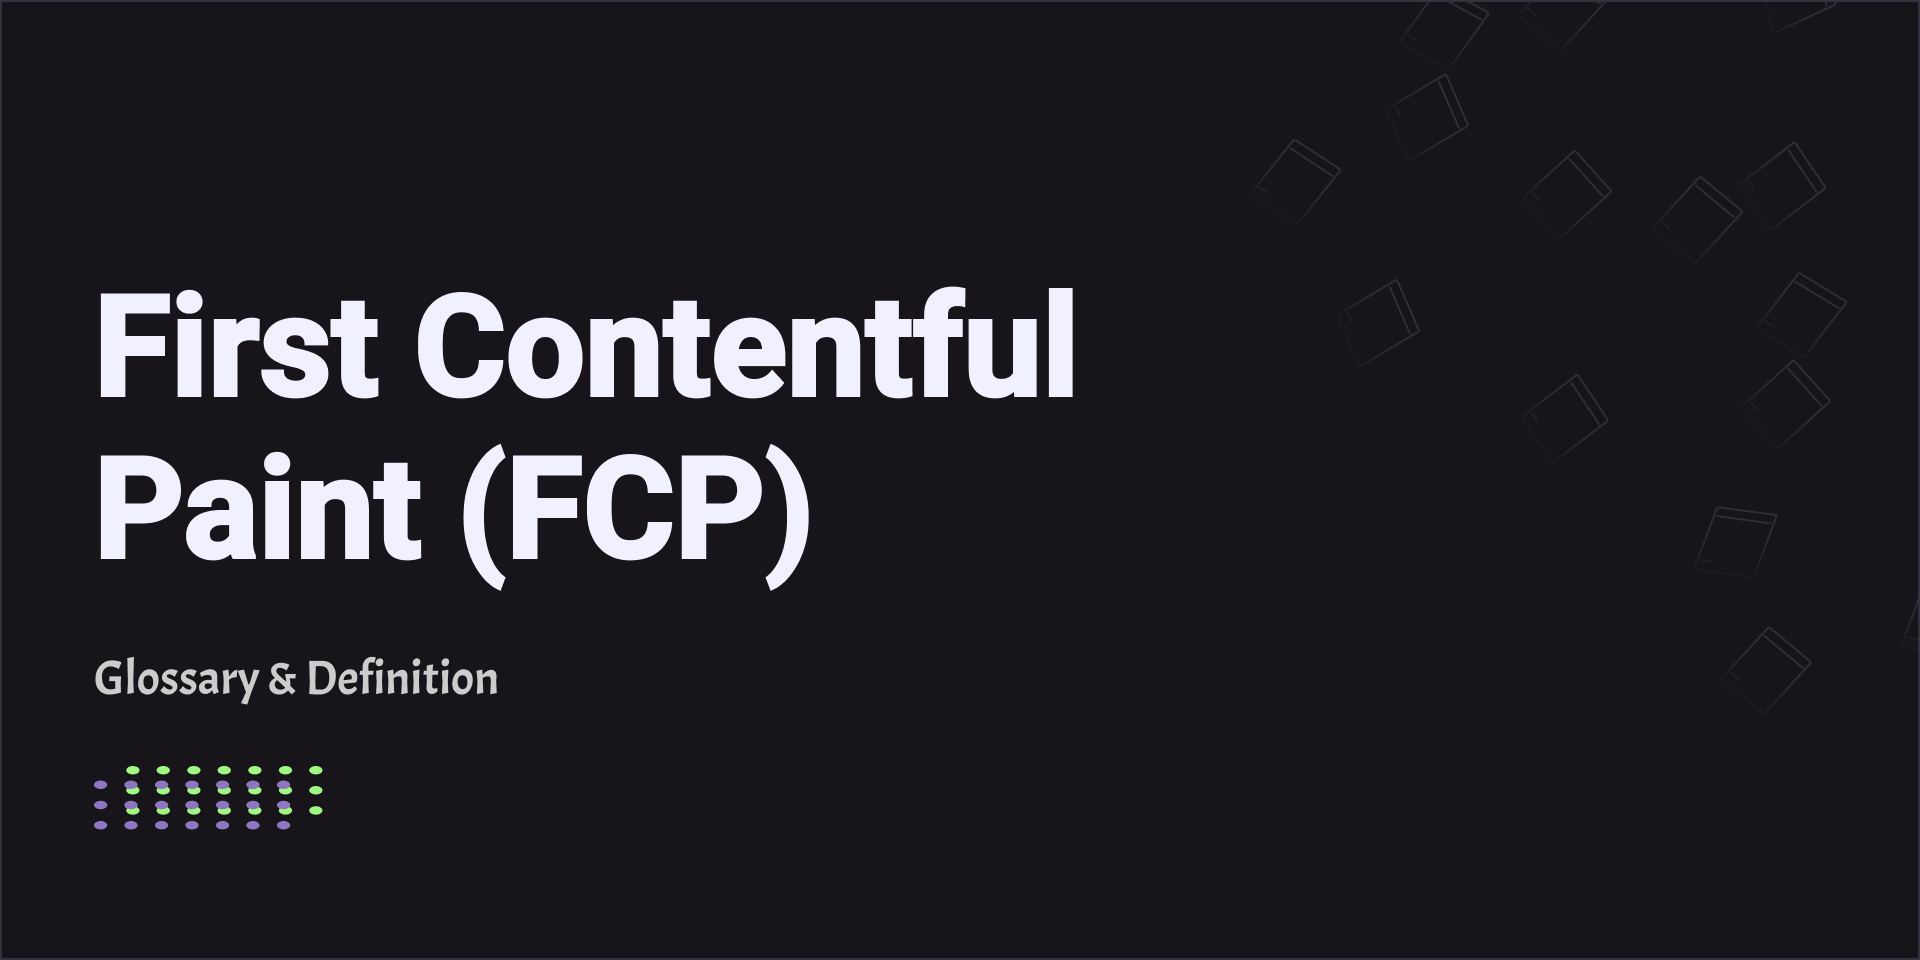 First Contentful Paint (FCP)